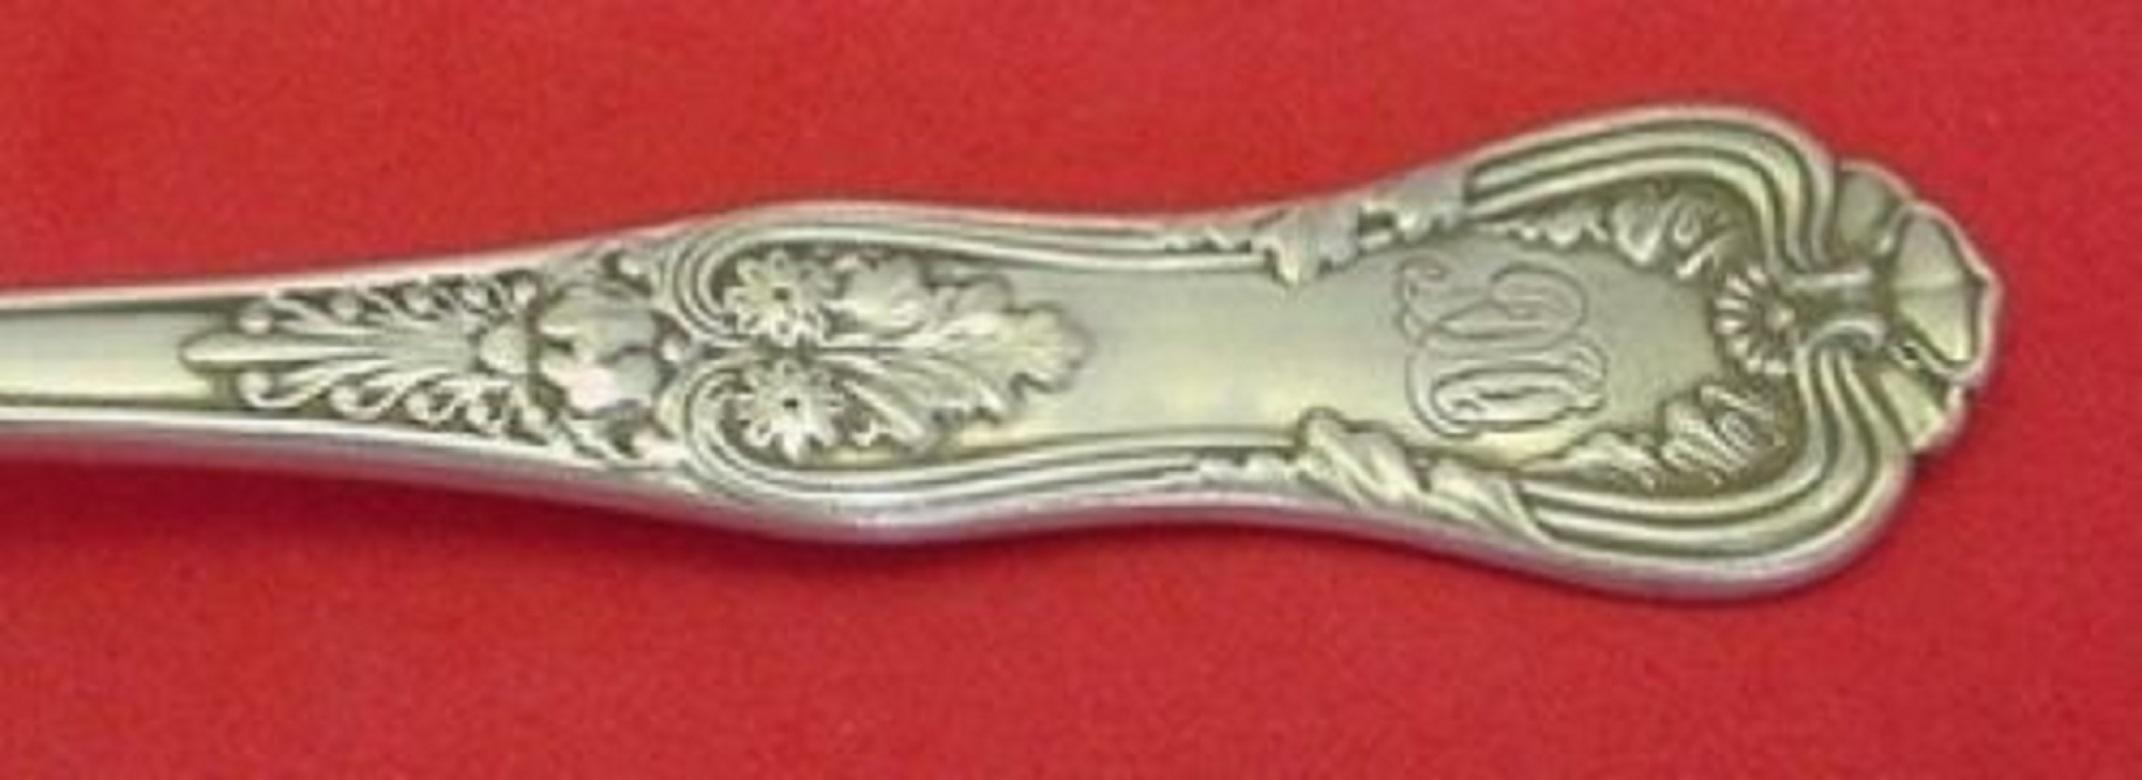 Silver plate flat handle butter spreader 5 1/2